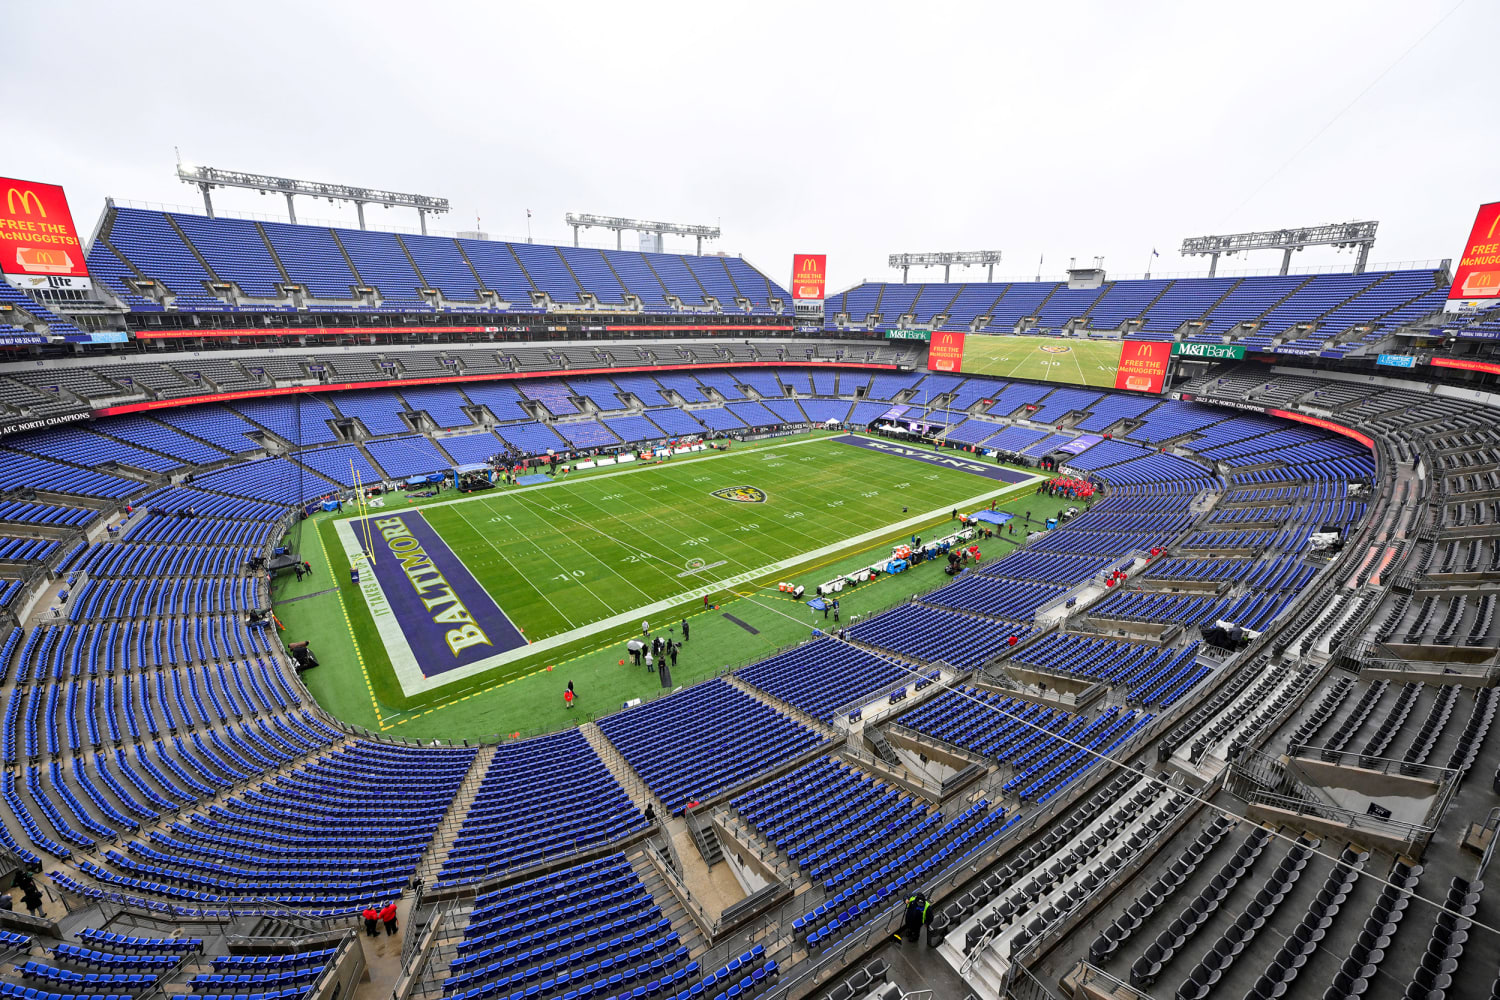 A man is accused of flying a drone over Baltimore Stadium during the AFC Championship Game